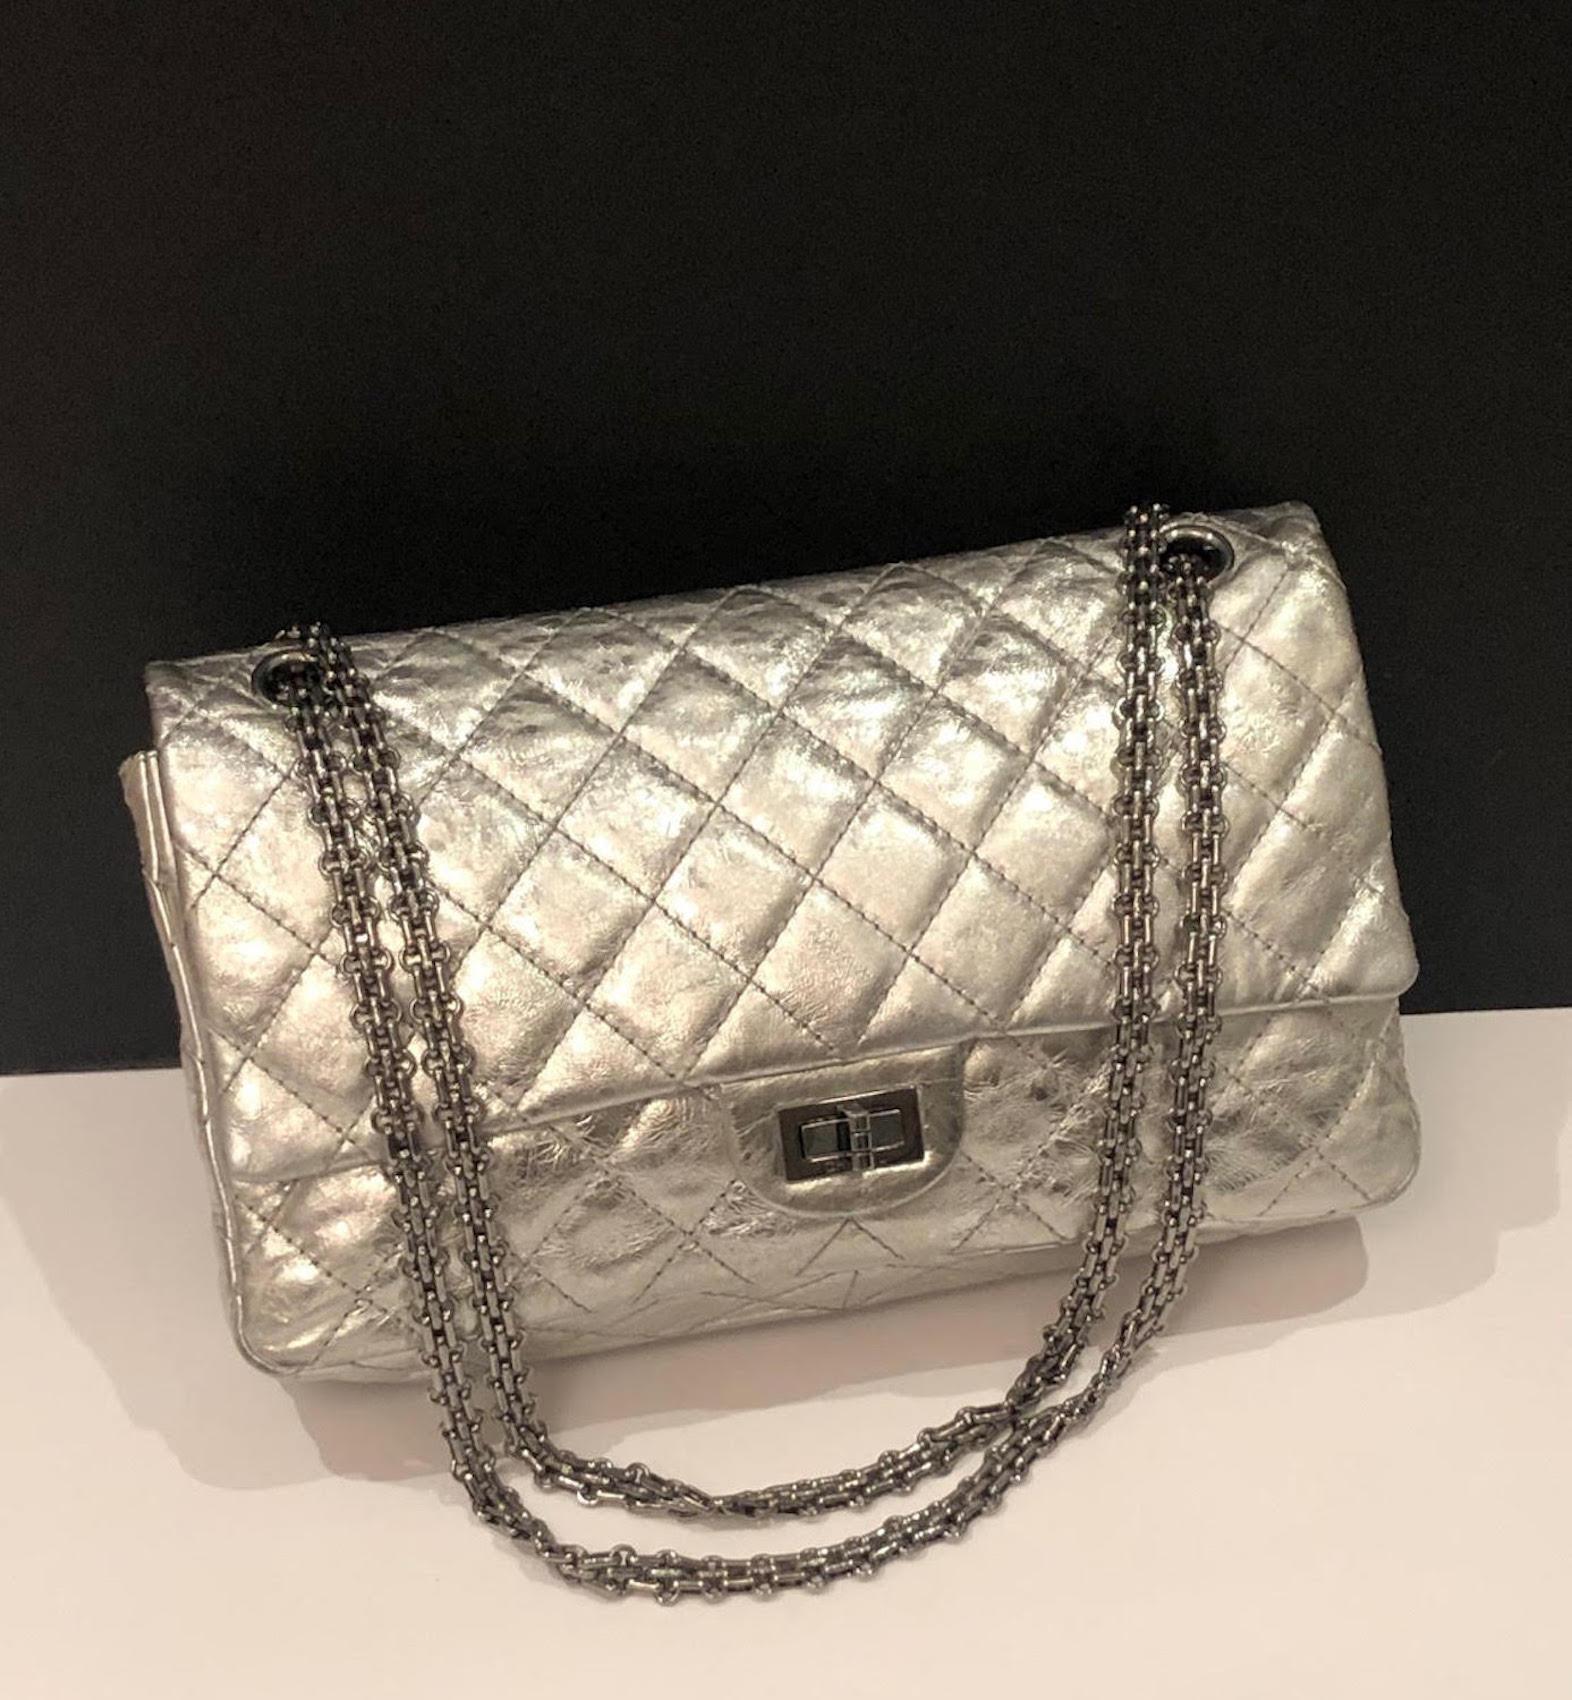 Brown CHANEL Metallic Silver Quilted 2.55 Aged Leather Reissue Double Flap Bag 228  For Sale